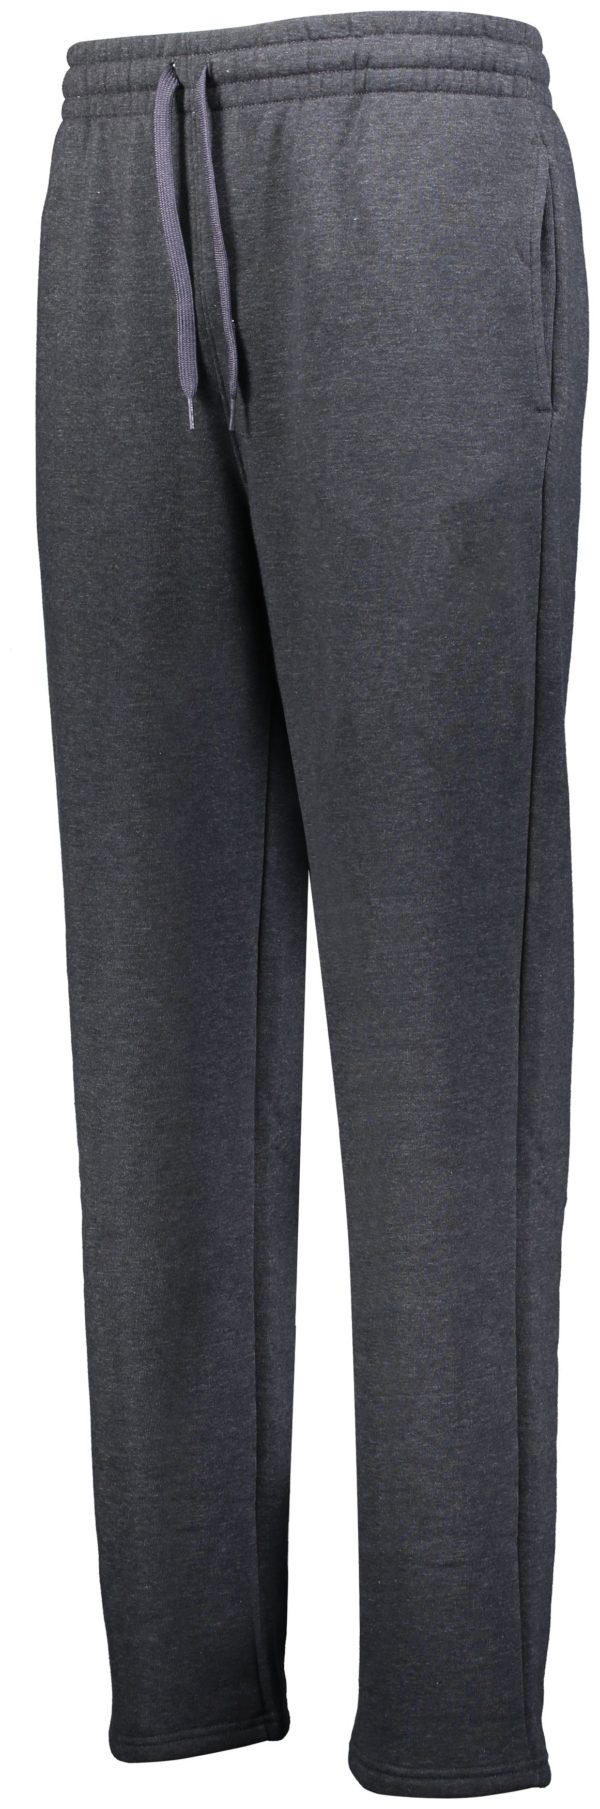 Russell 80/20 OPEN BOTTOM SWEATPANT CHARCOAL GREY HEATHER